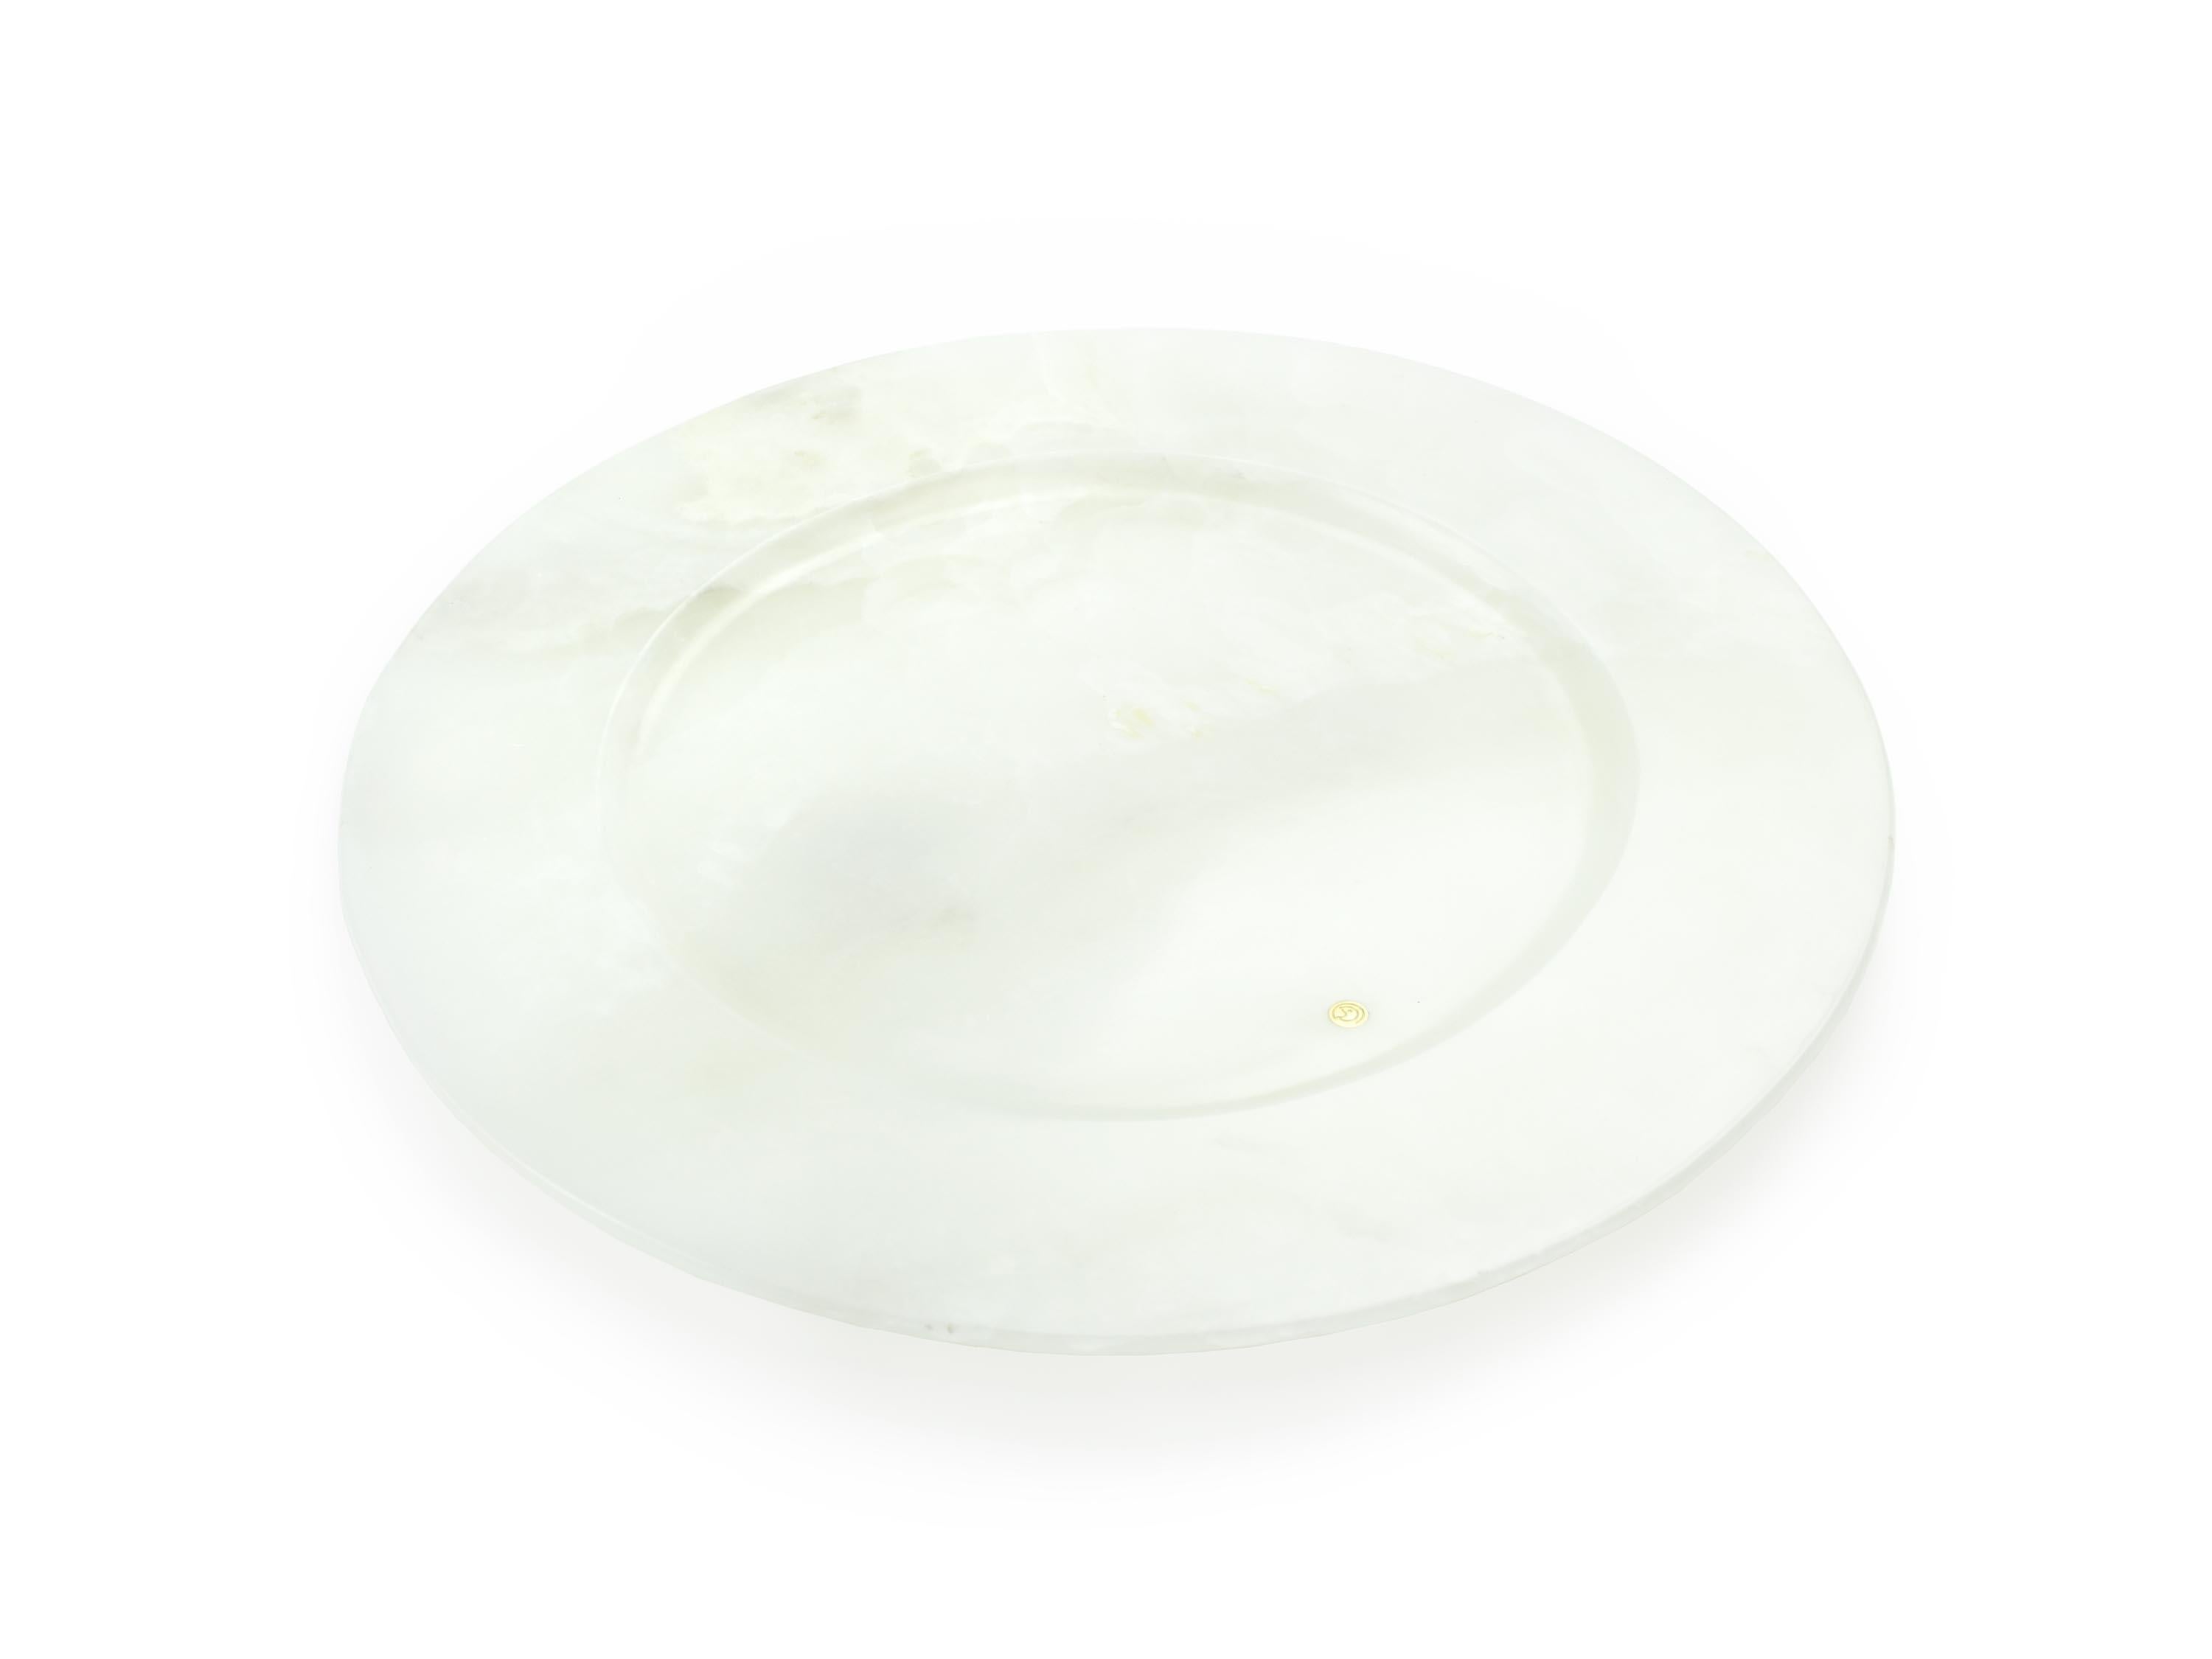 Set of 6 hand carved charger plates in white onyx. Multiple use as charger plates, plates, platters and placers. The polished finishing underlines the transparency of the onyx making this a very precious object. 

Dimensions: D 33, H 1.9 cm.